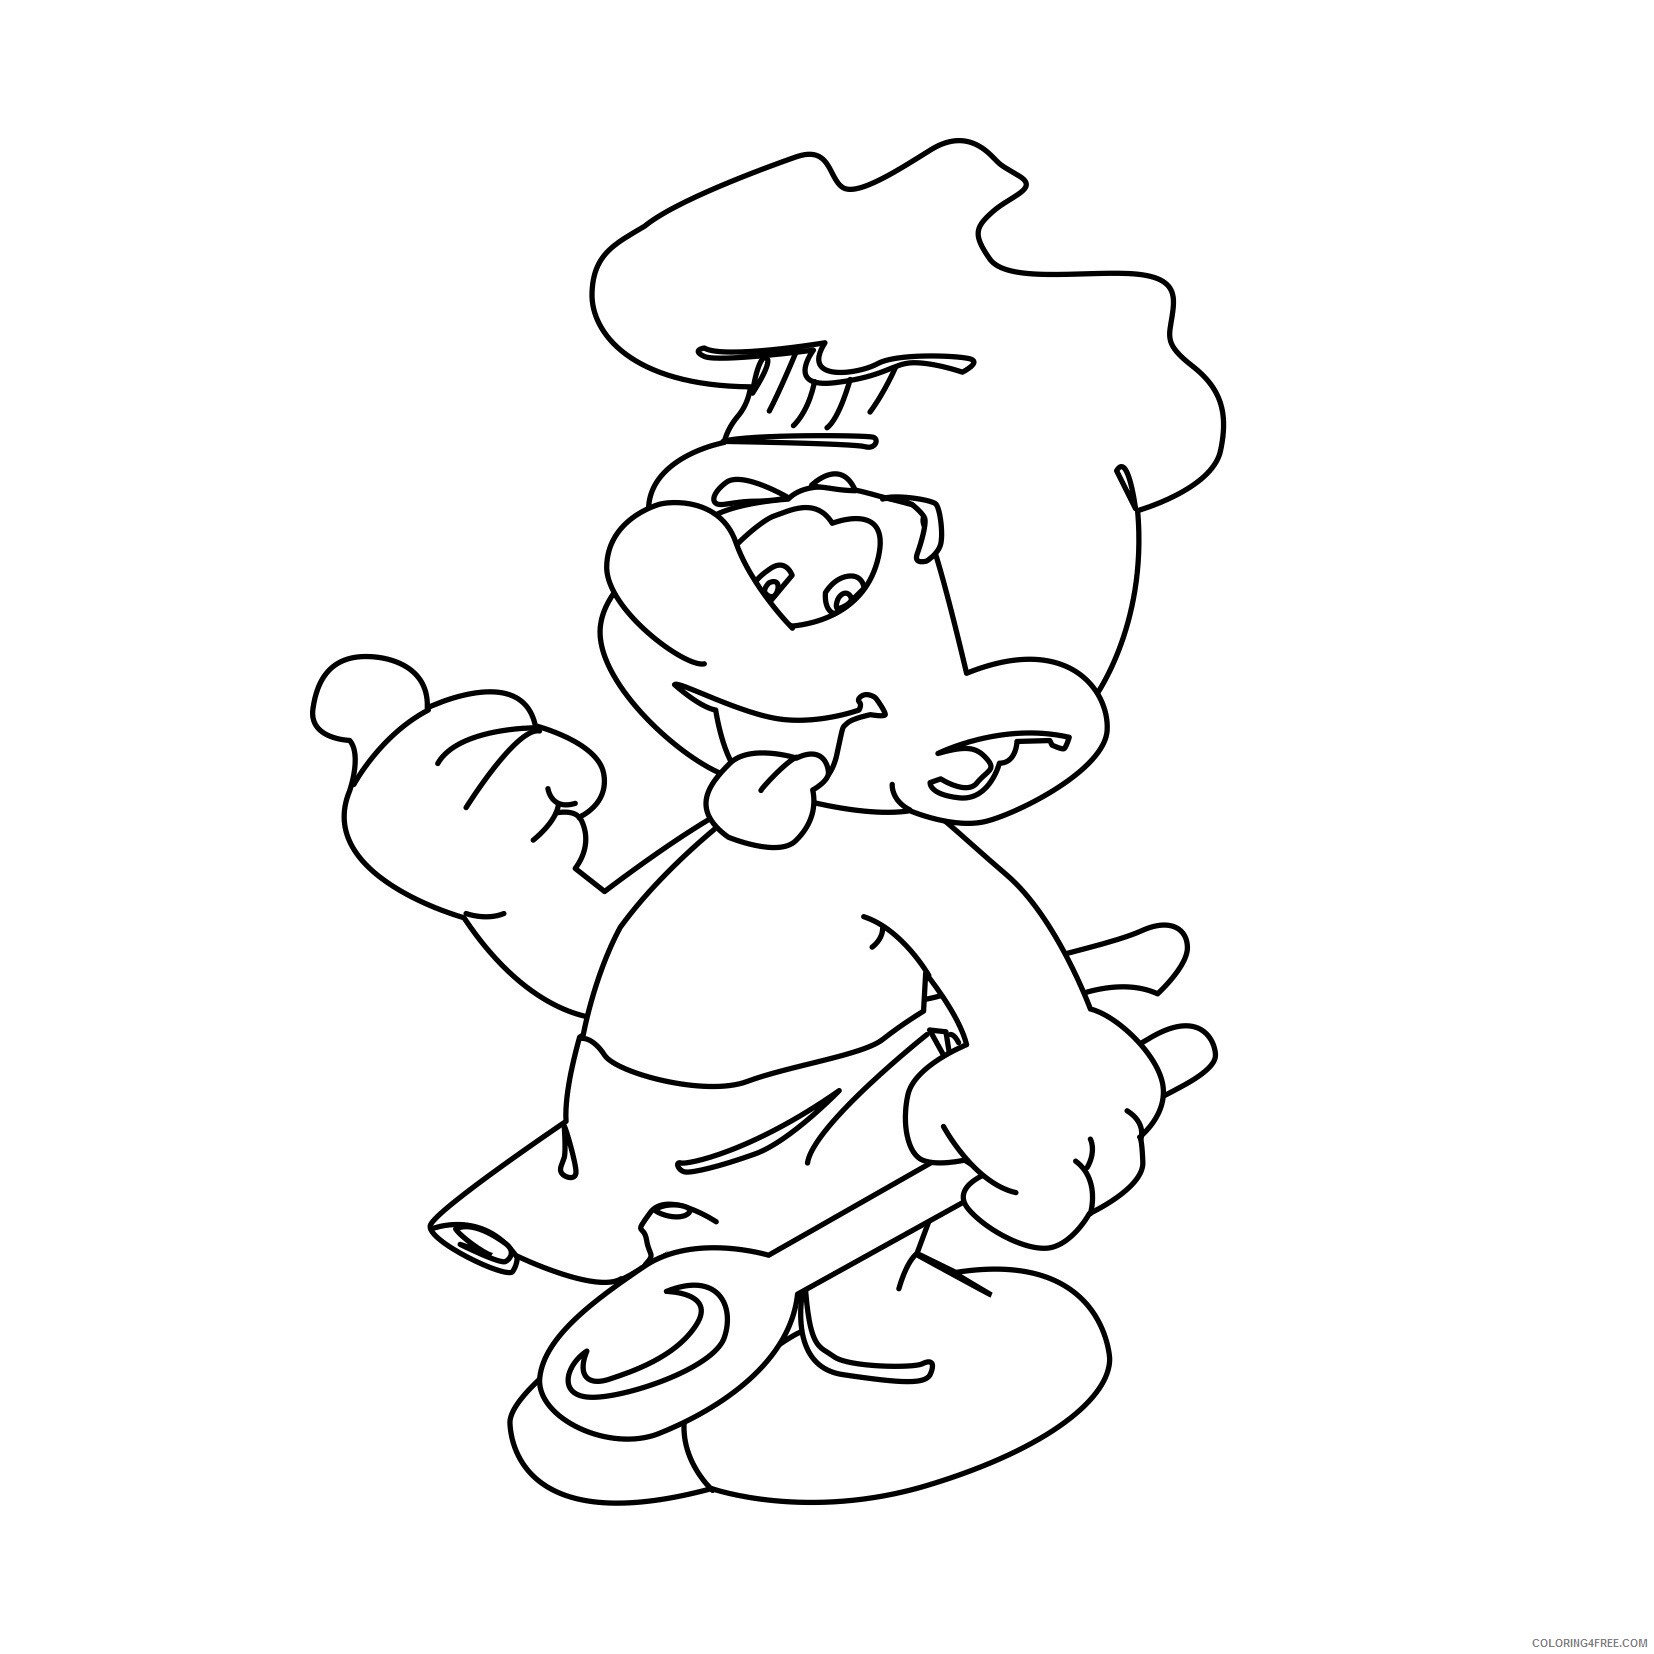 The Smurfs Coloring Pages TV Film of Smurfs Printable 2020 09665 Coloring4free